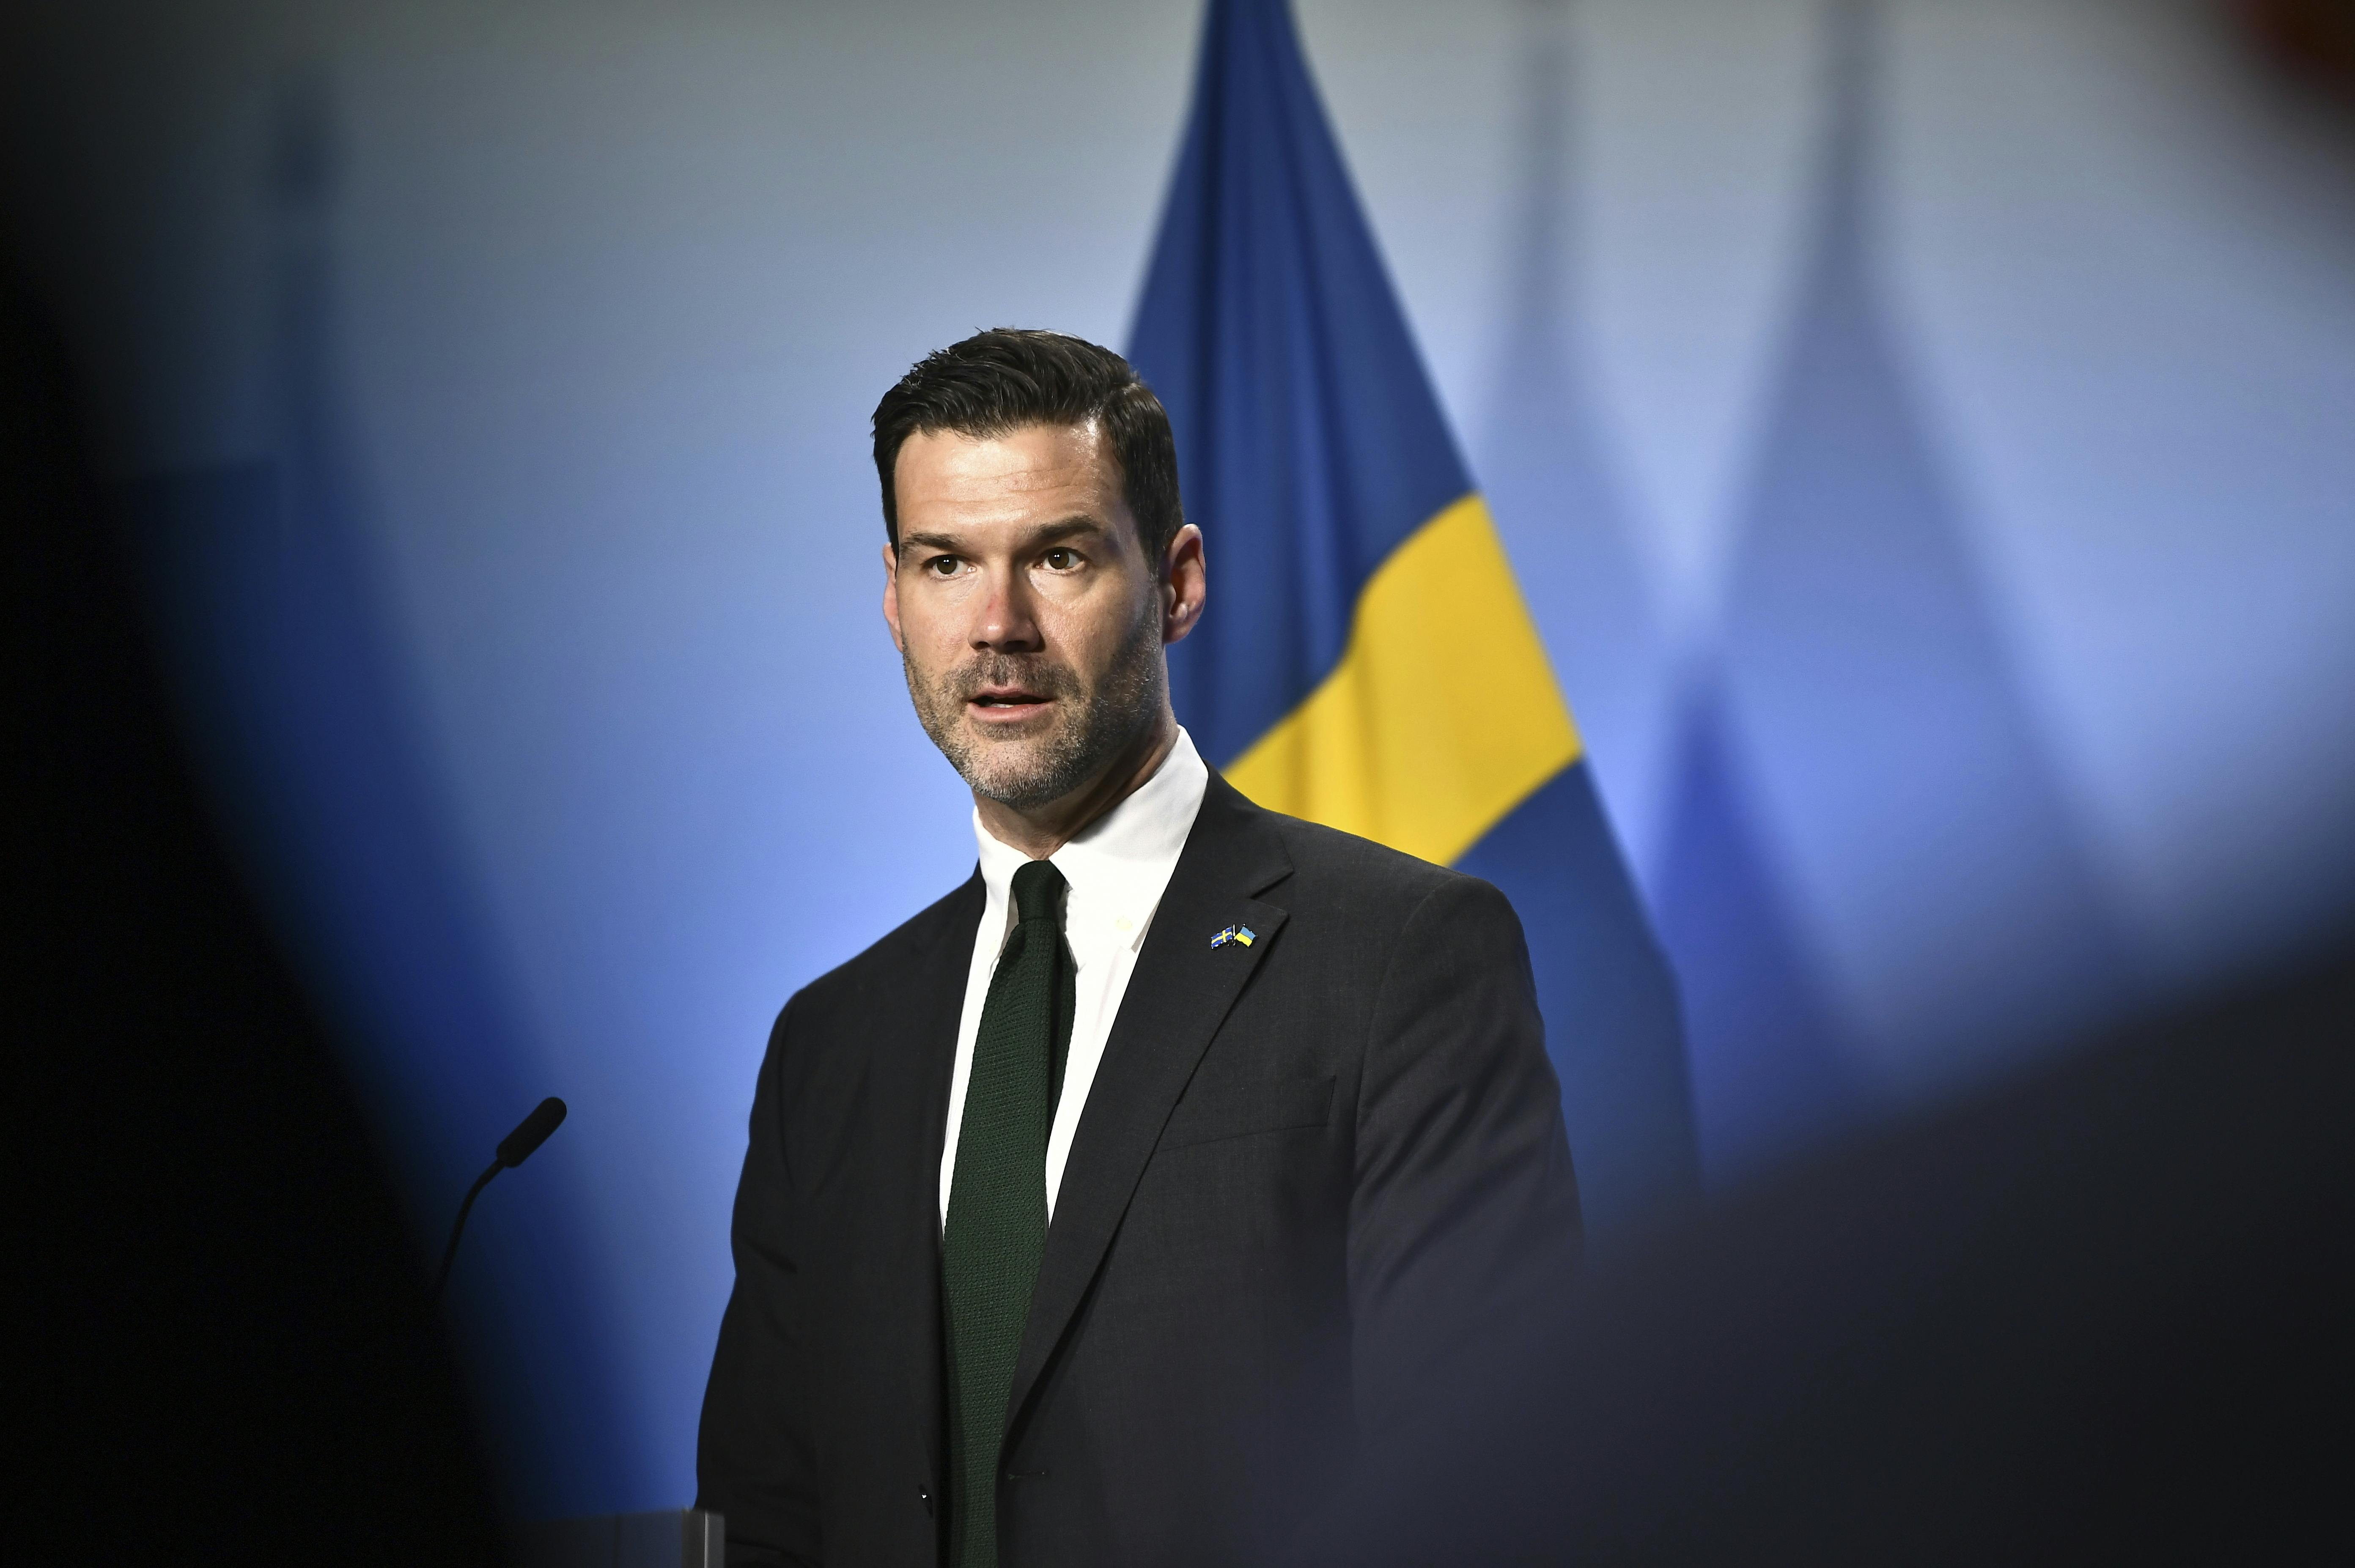 Sweden's Foreign Trade Minister Johan Forssell speaks during a press conference in connection with the informal meeting of EU trade ministers, outside Stockholm, Sweden, Friday March 10, 2023. (Caisa Rasmussen/TT News Agency via AP)